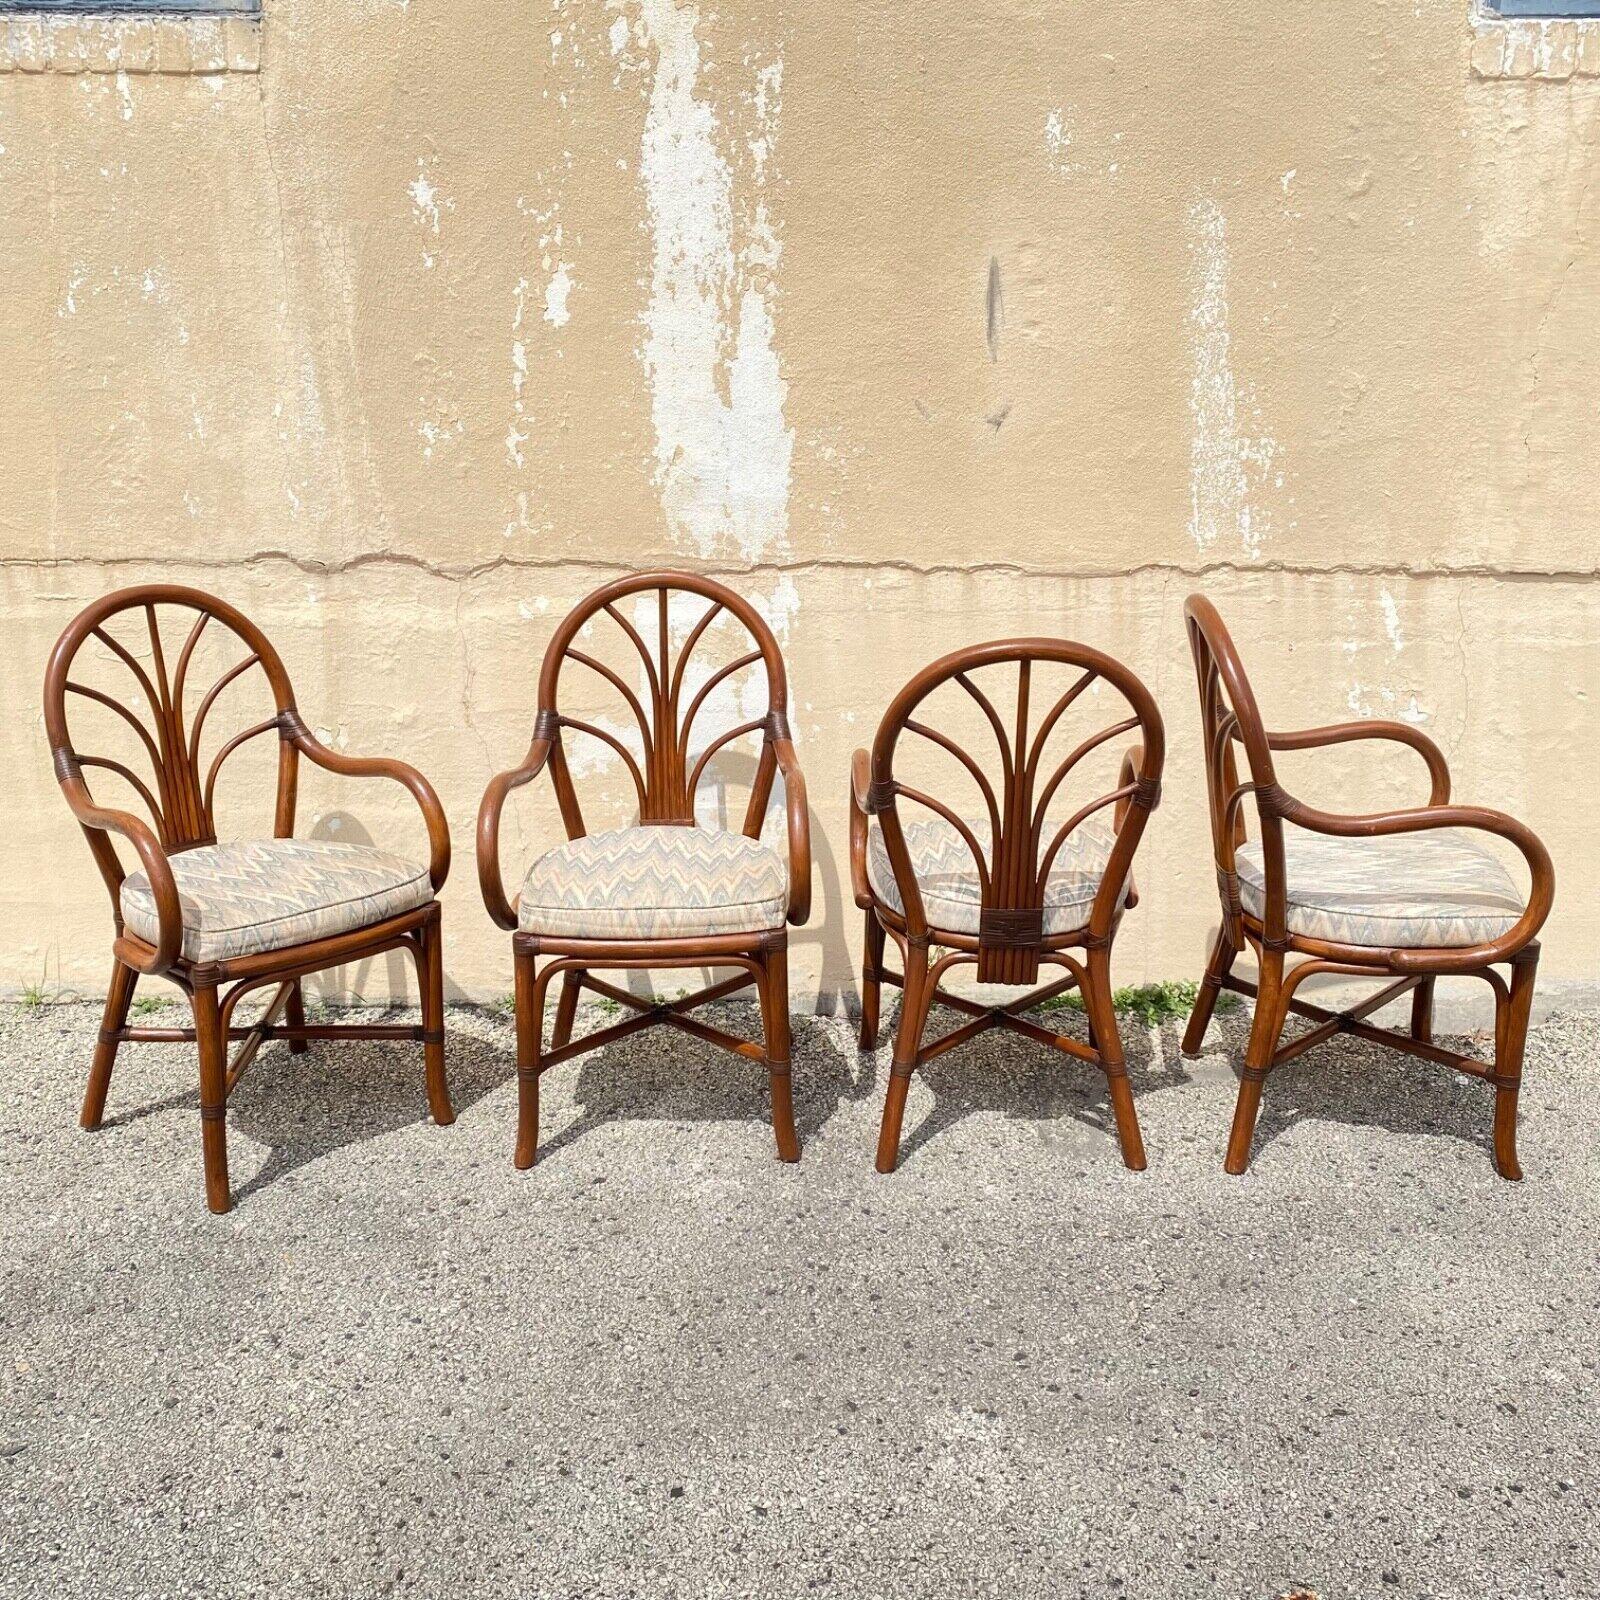 Vintage Bentwood Rattan Hollywood Regency Fan Back Dining Chairs - Set of 4 For Sale 7